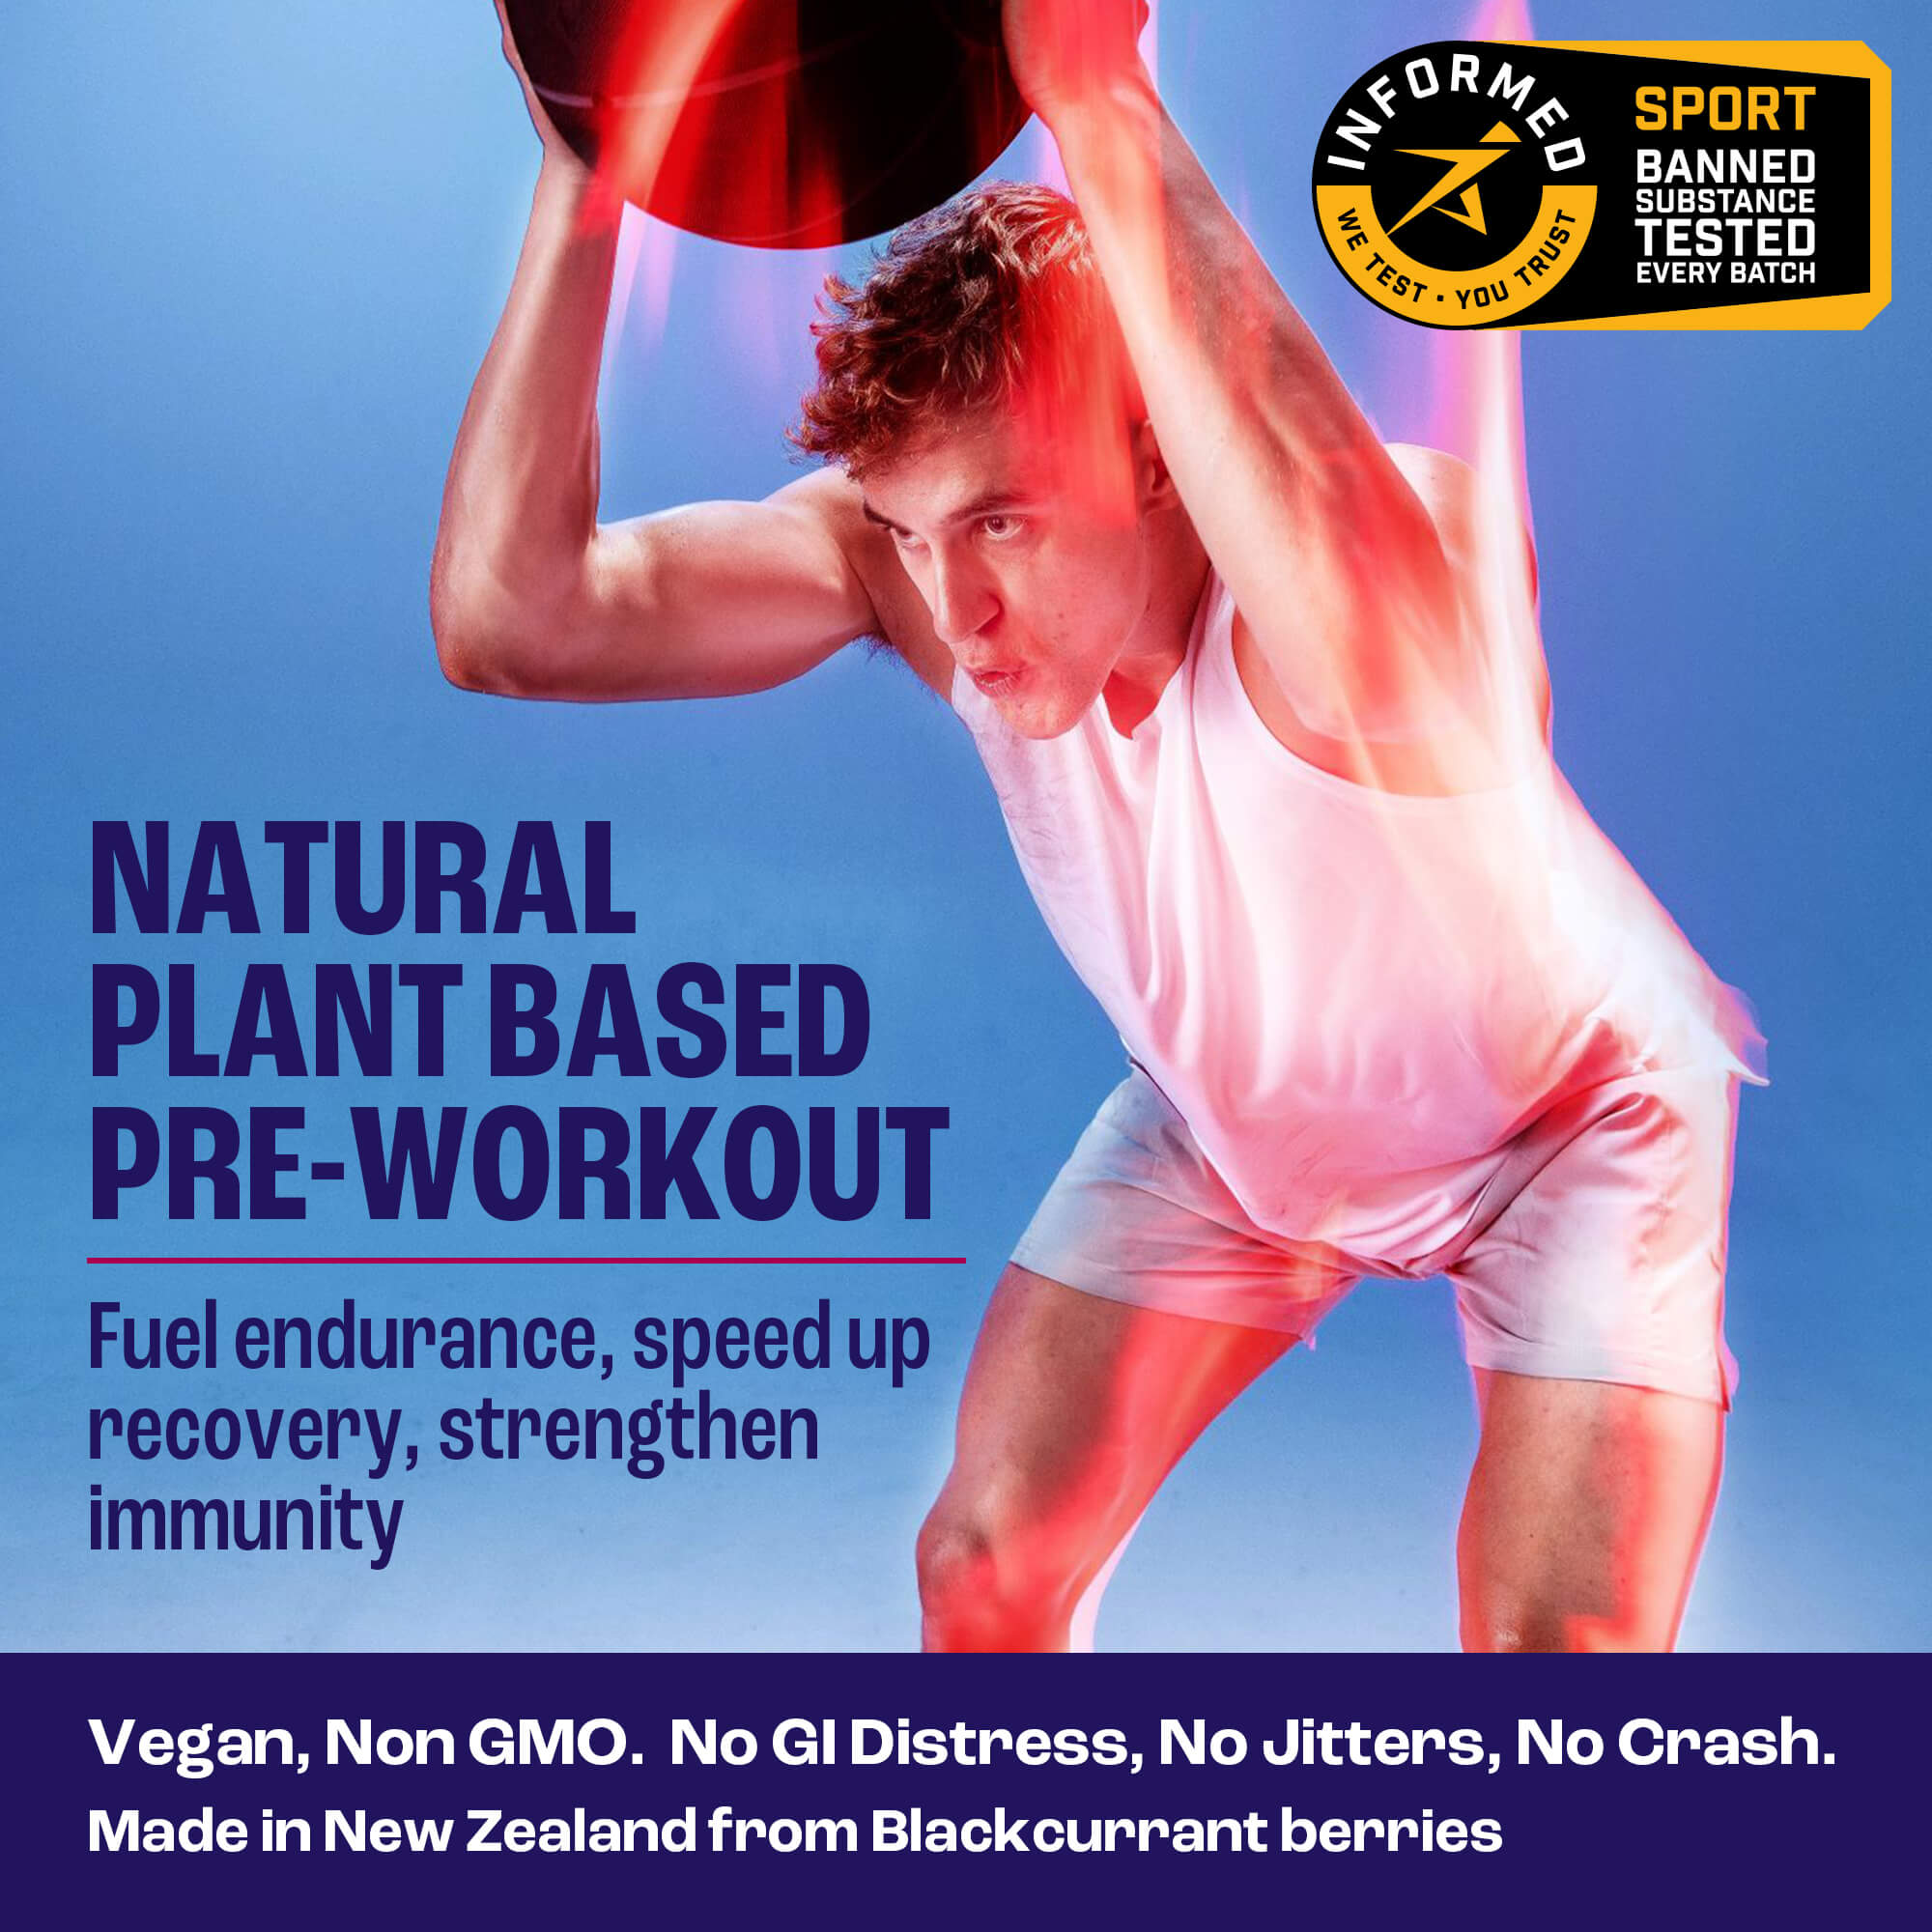 2before is a natural, plant-based pre-workout made from blackcurrant powder